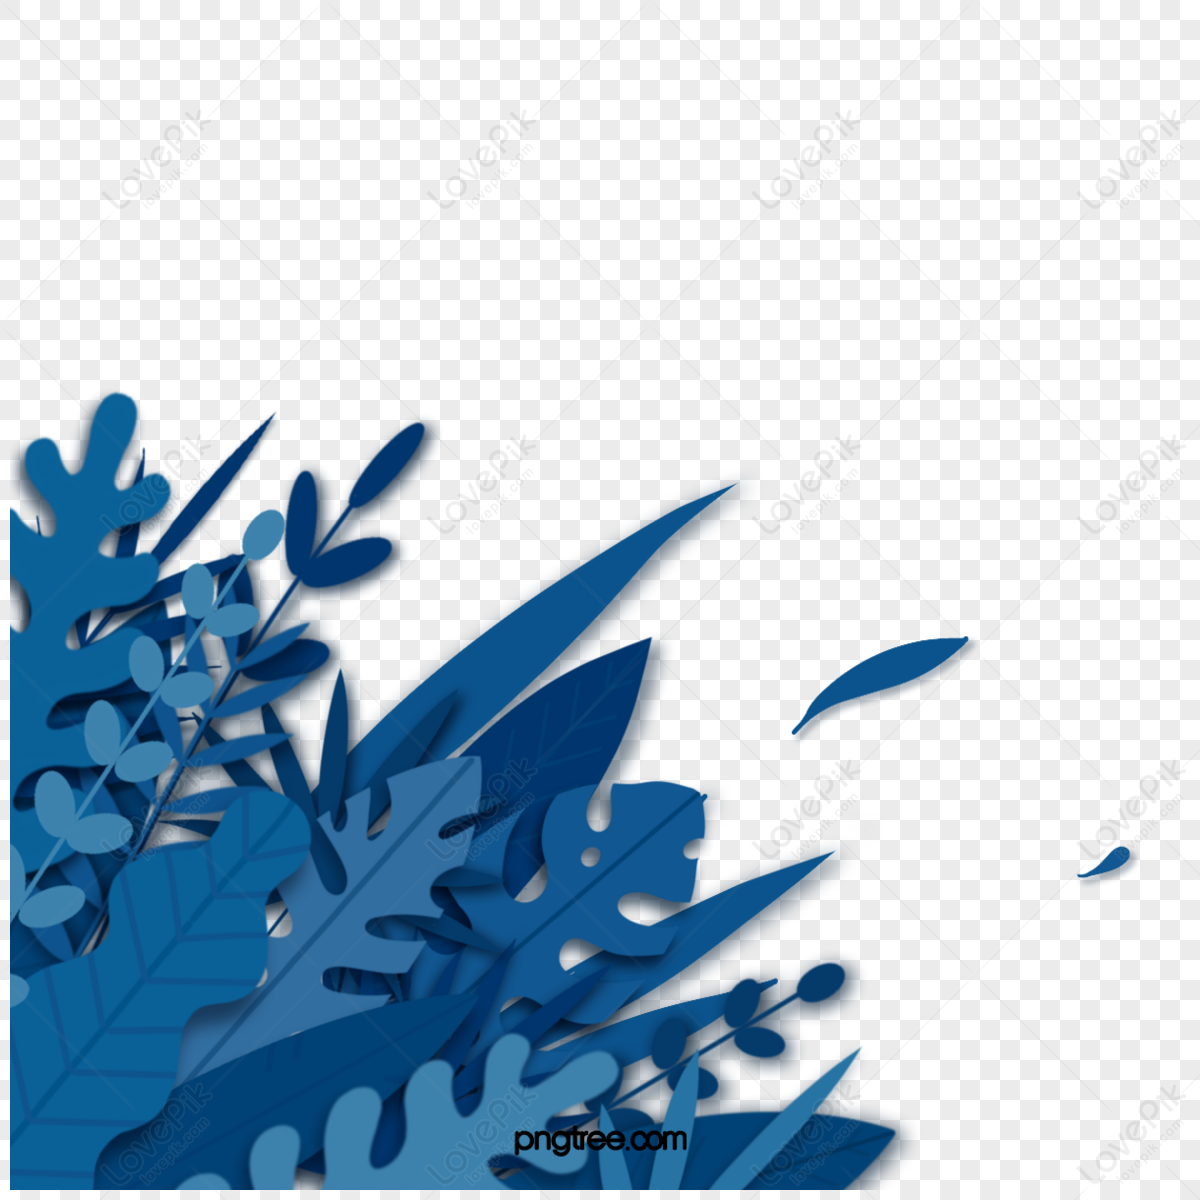 Hand drawn leaves border cartoon leaves,colored leaves,leaf png free download